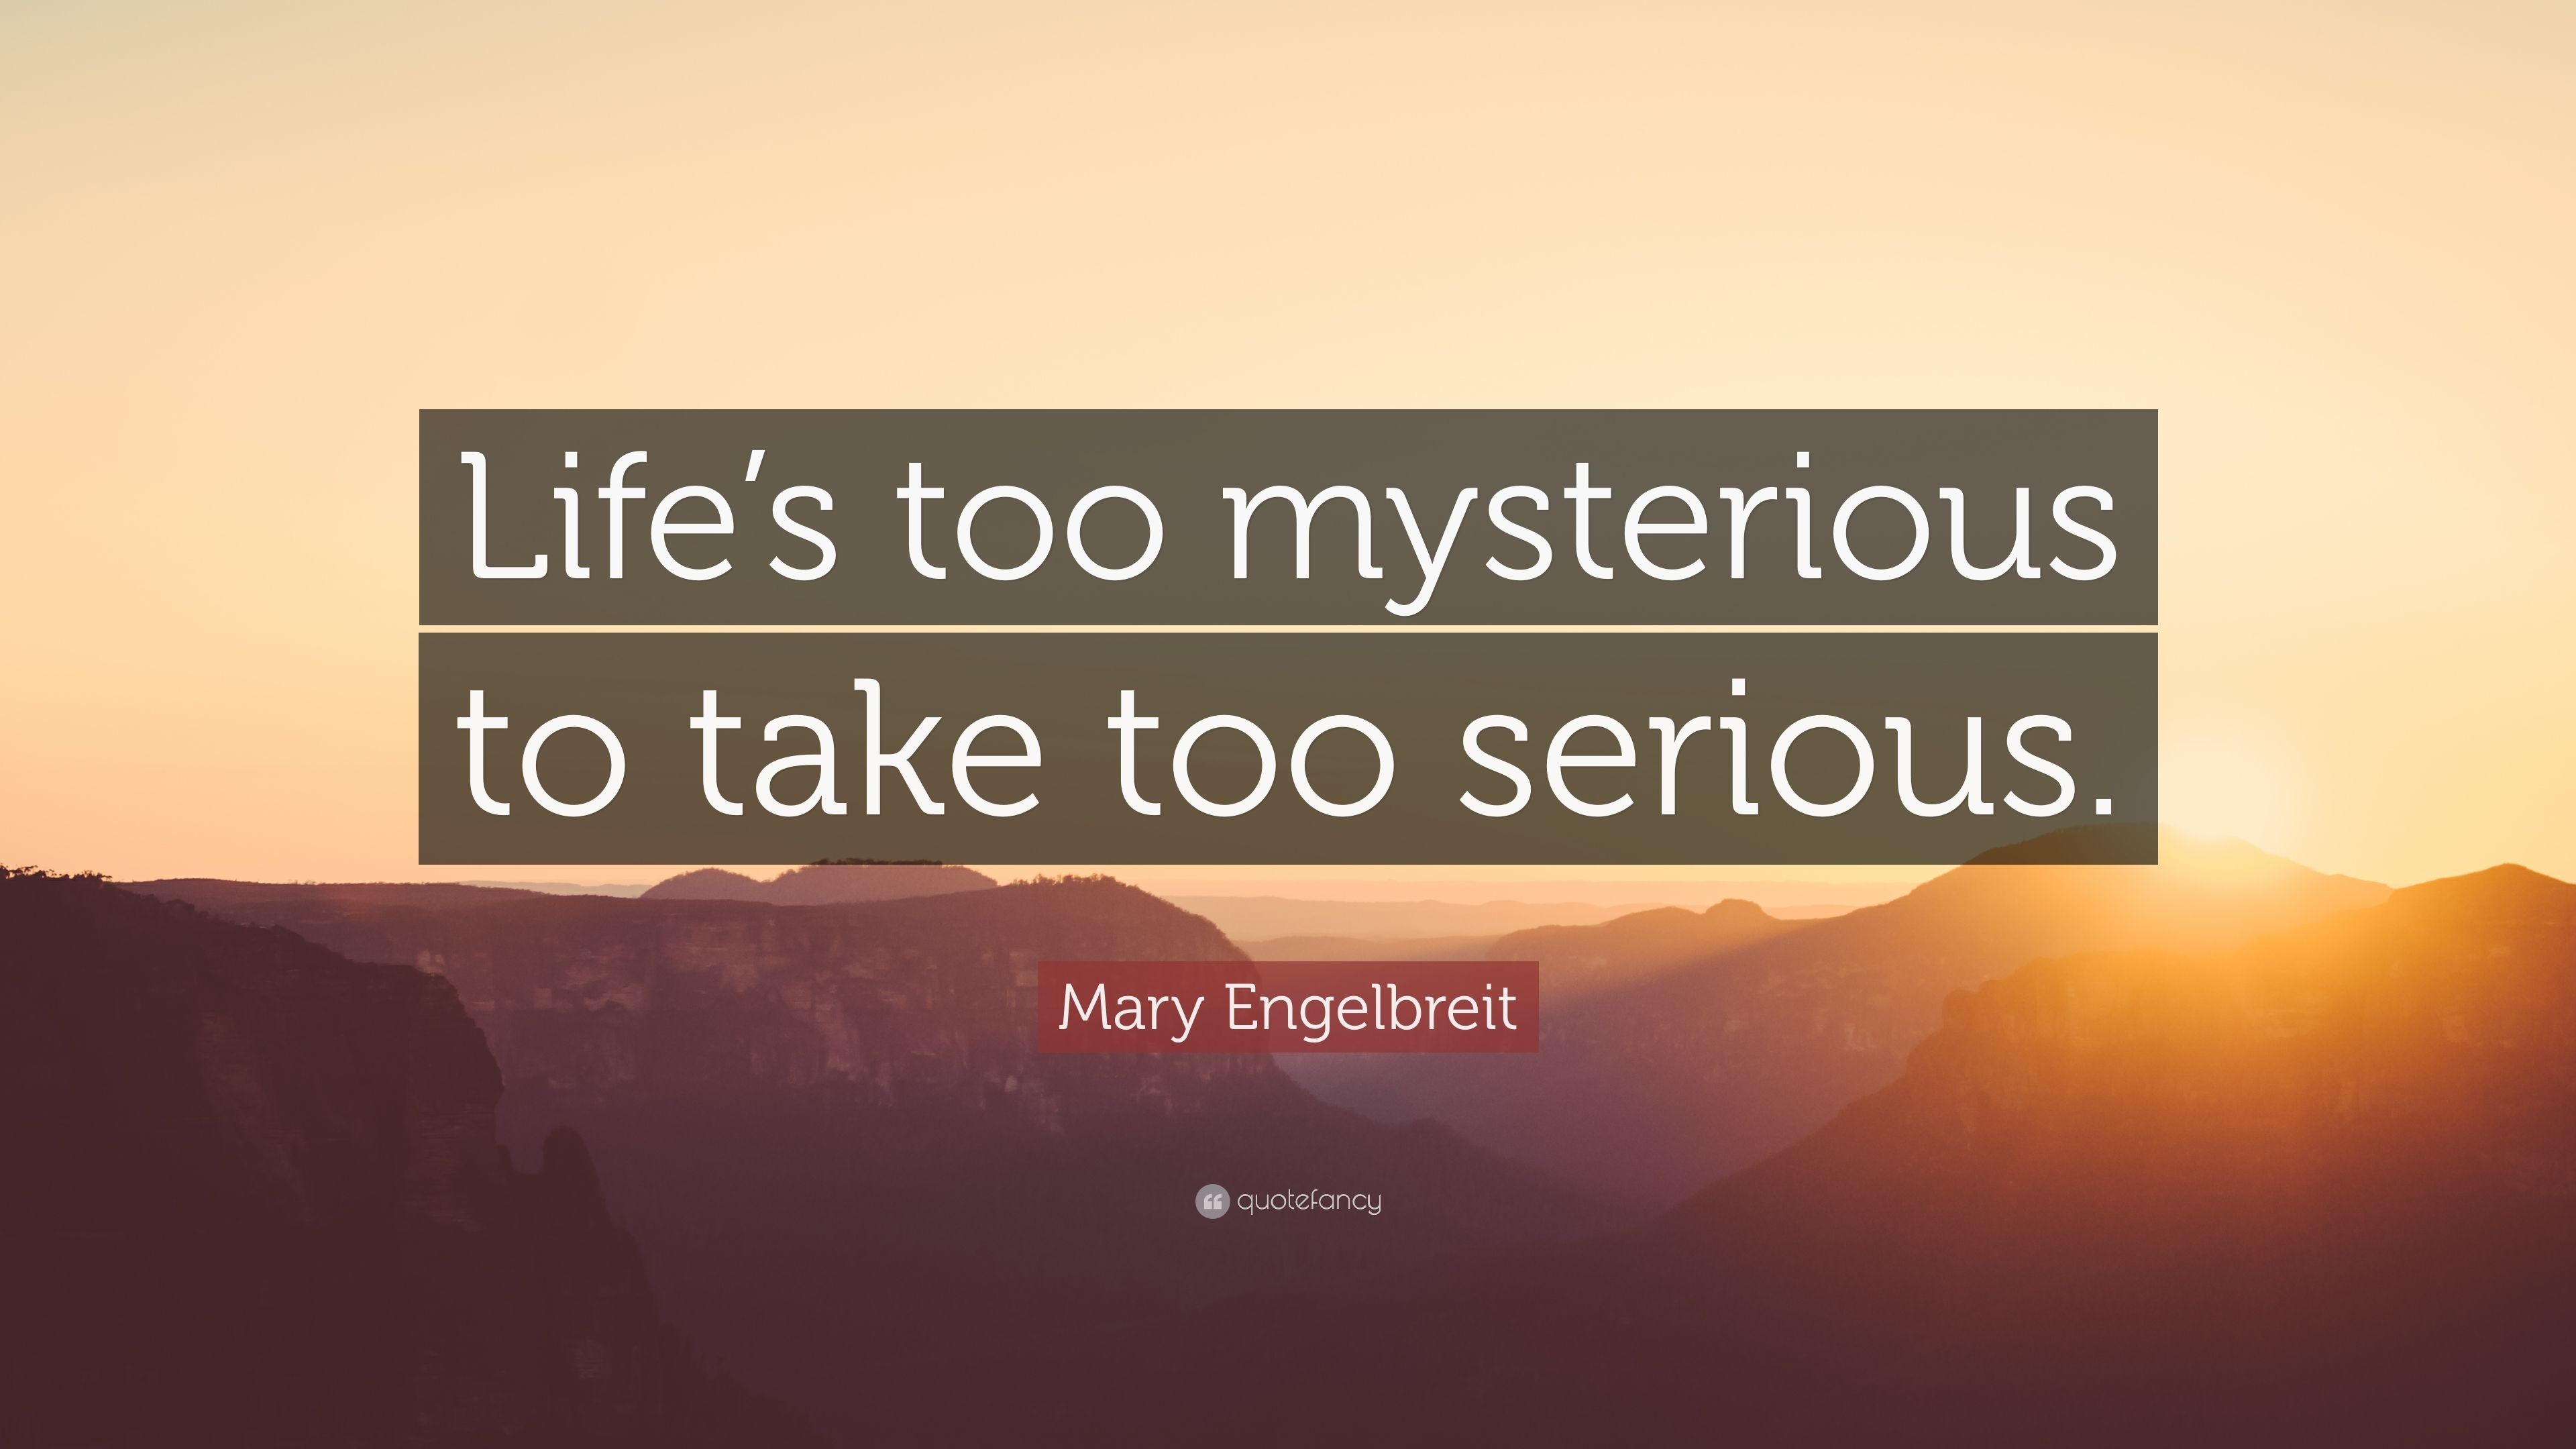 3840x2160 Mary Engelbreit Quote: “Life's too mysterious to take too serious.”